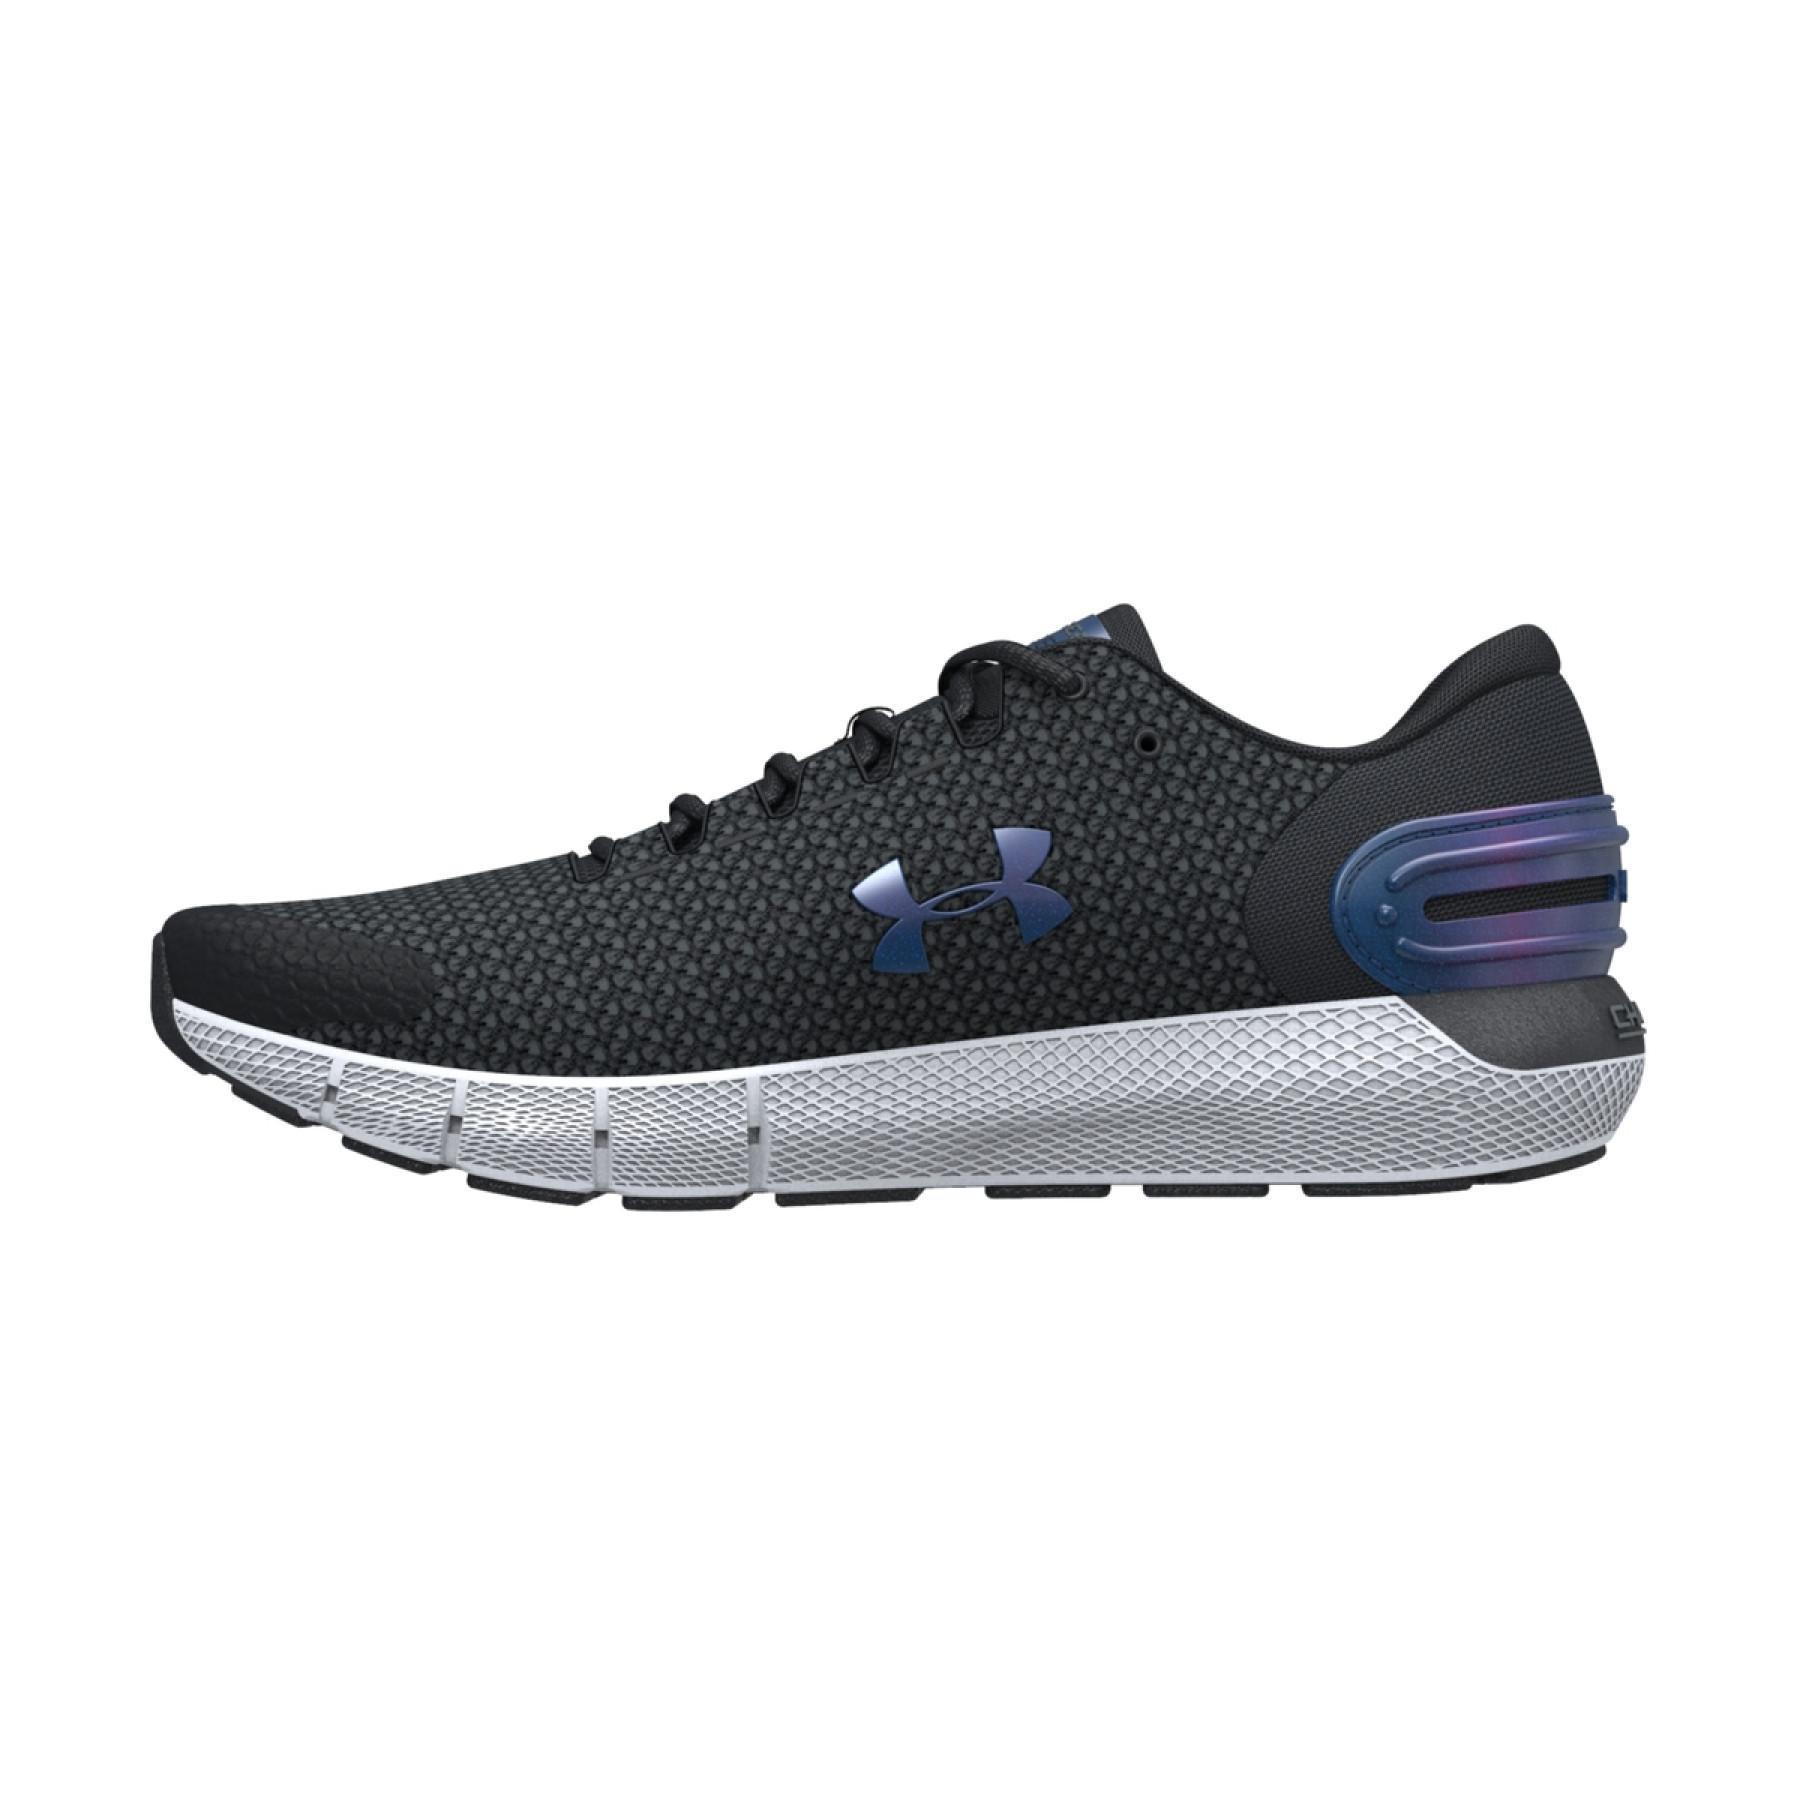 Chaussures de running femme Under Armour Charged Rogue 2.5 Colorshift